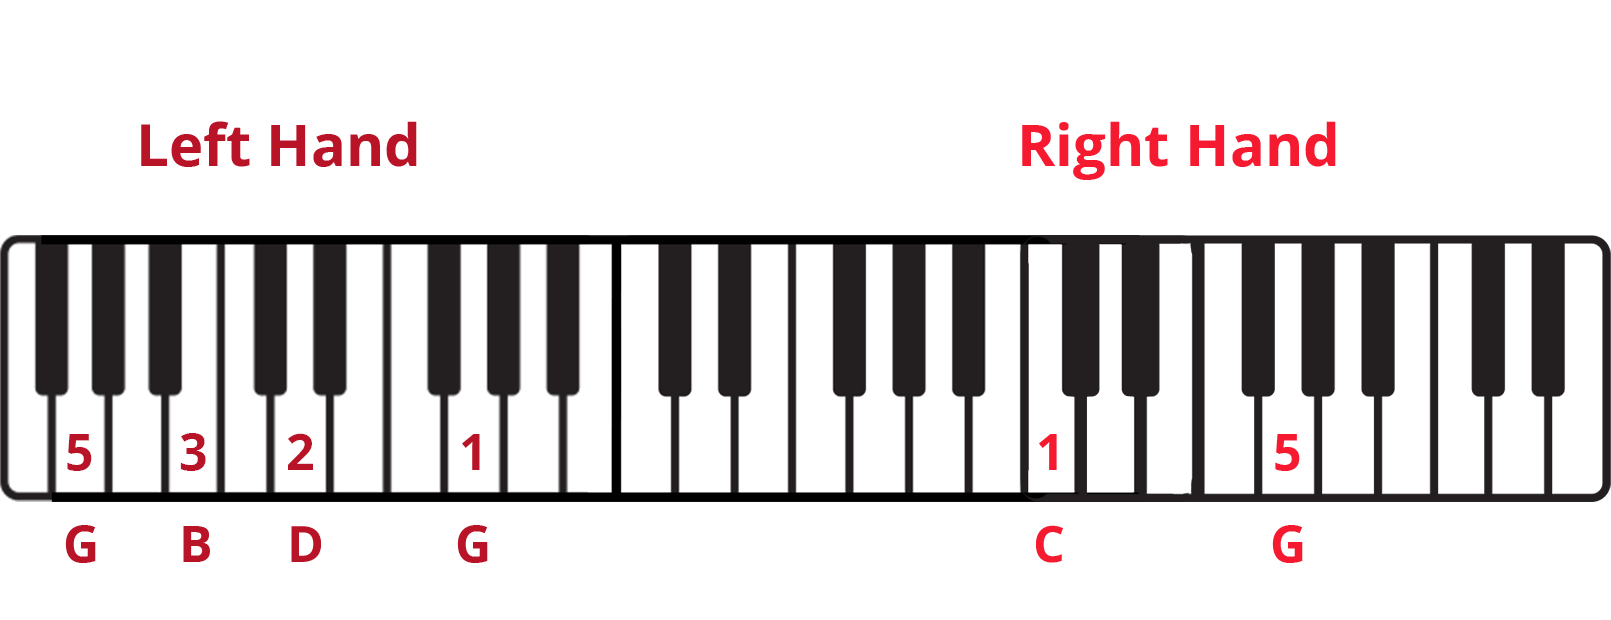 Keyboard diagram with G-B-D-G in the left hand and C-G in the right hand with fingering and notes labelled.